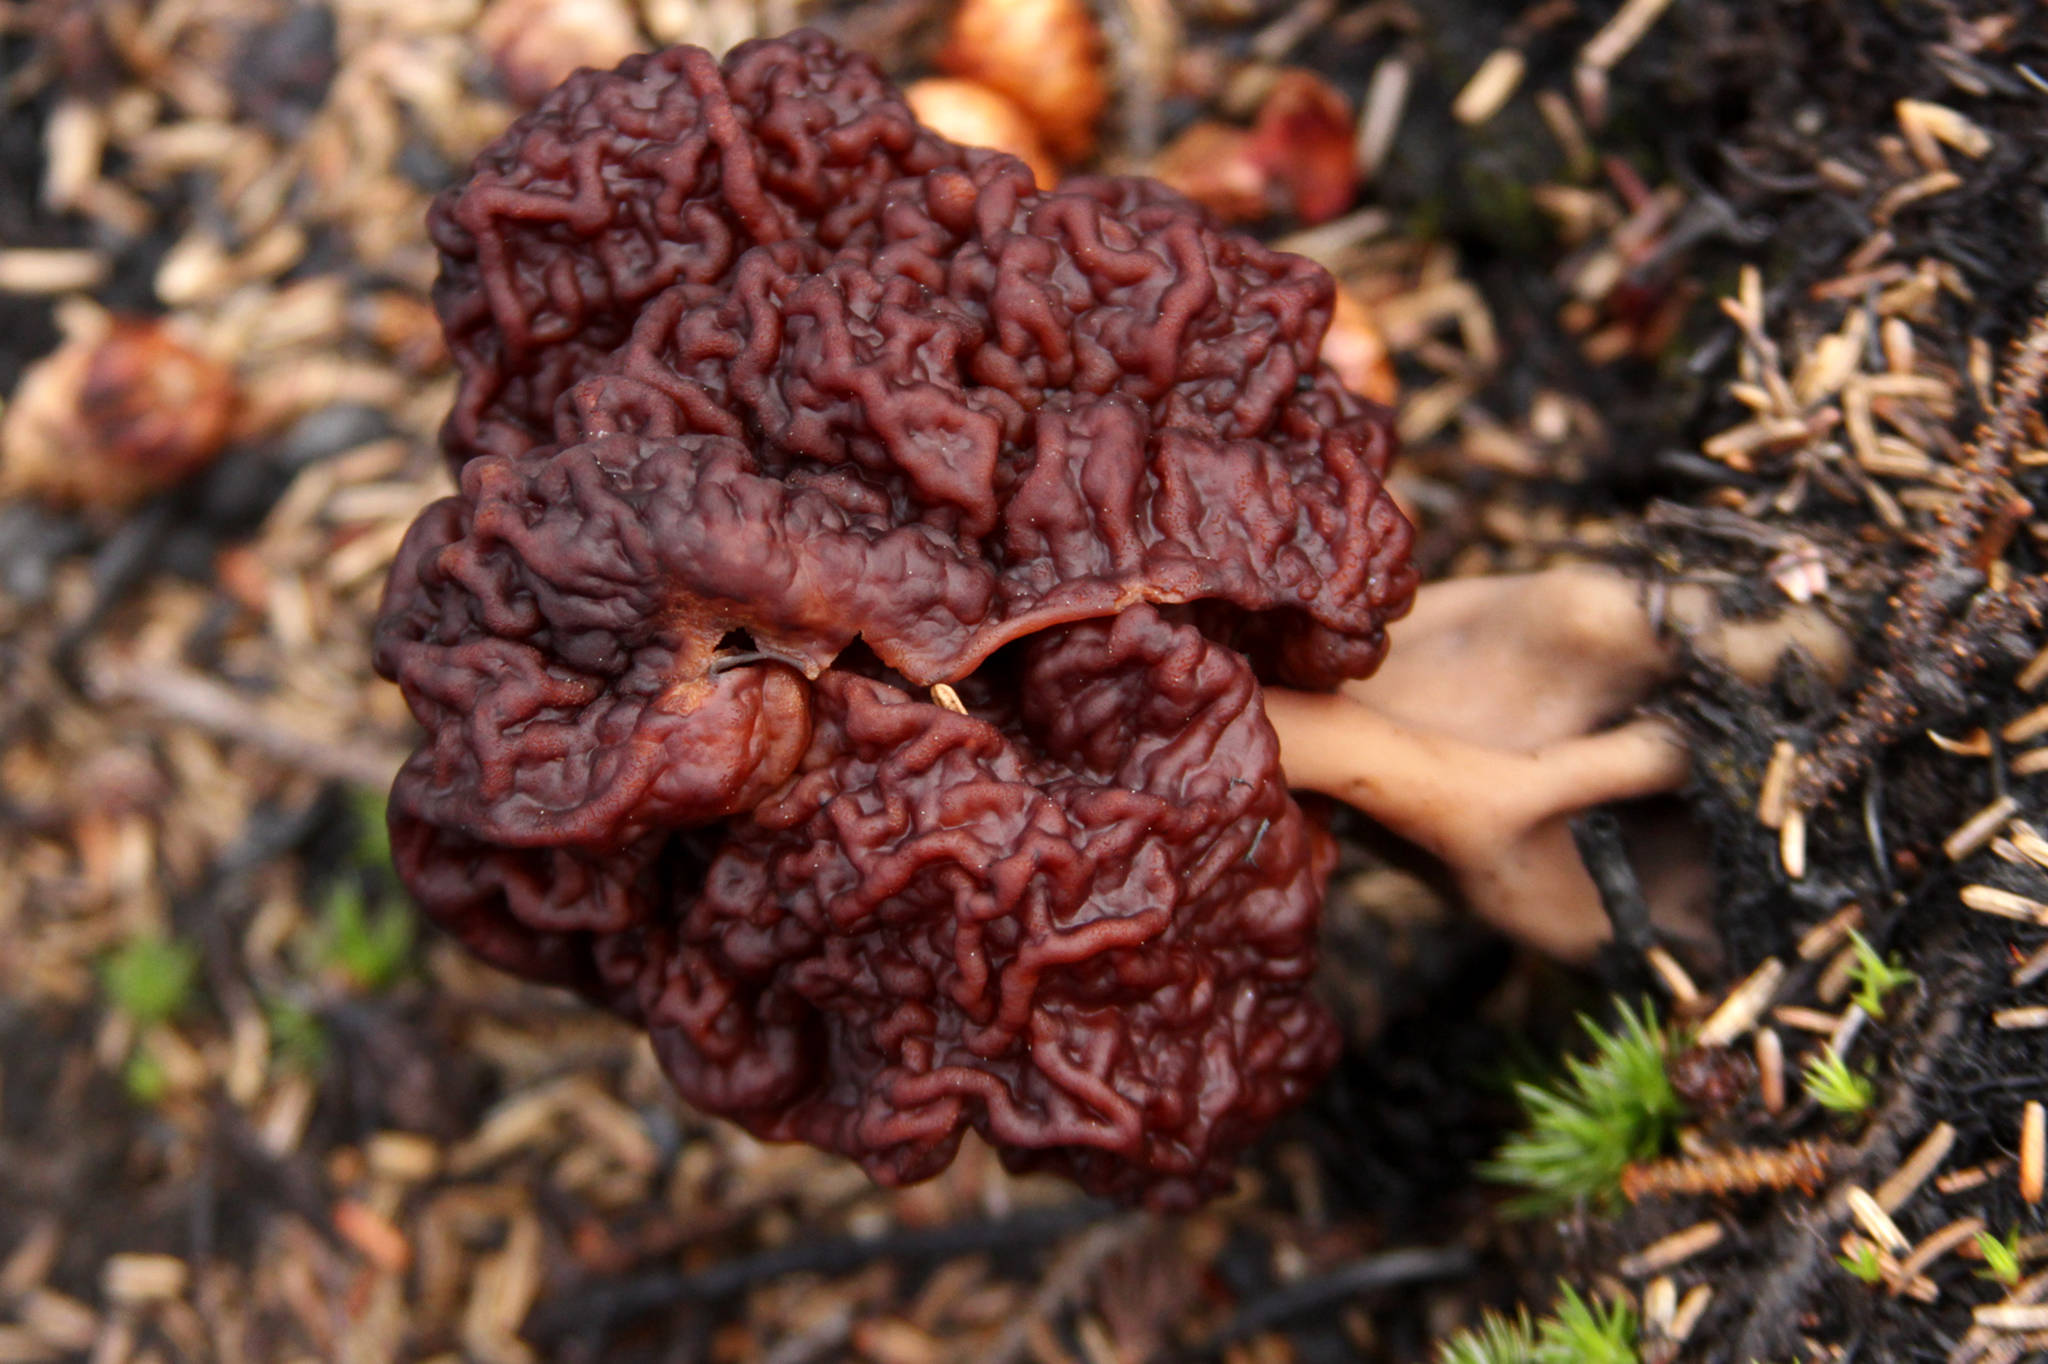 A false morel grows on the forest floor on Friday, May 26 near Sterling. Toxic false morels are redder, lumpier, and have fatter ridges and shallower pits than edible true morels. Unlike true morels, their stems are solid rather than hollow inside.